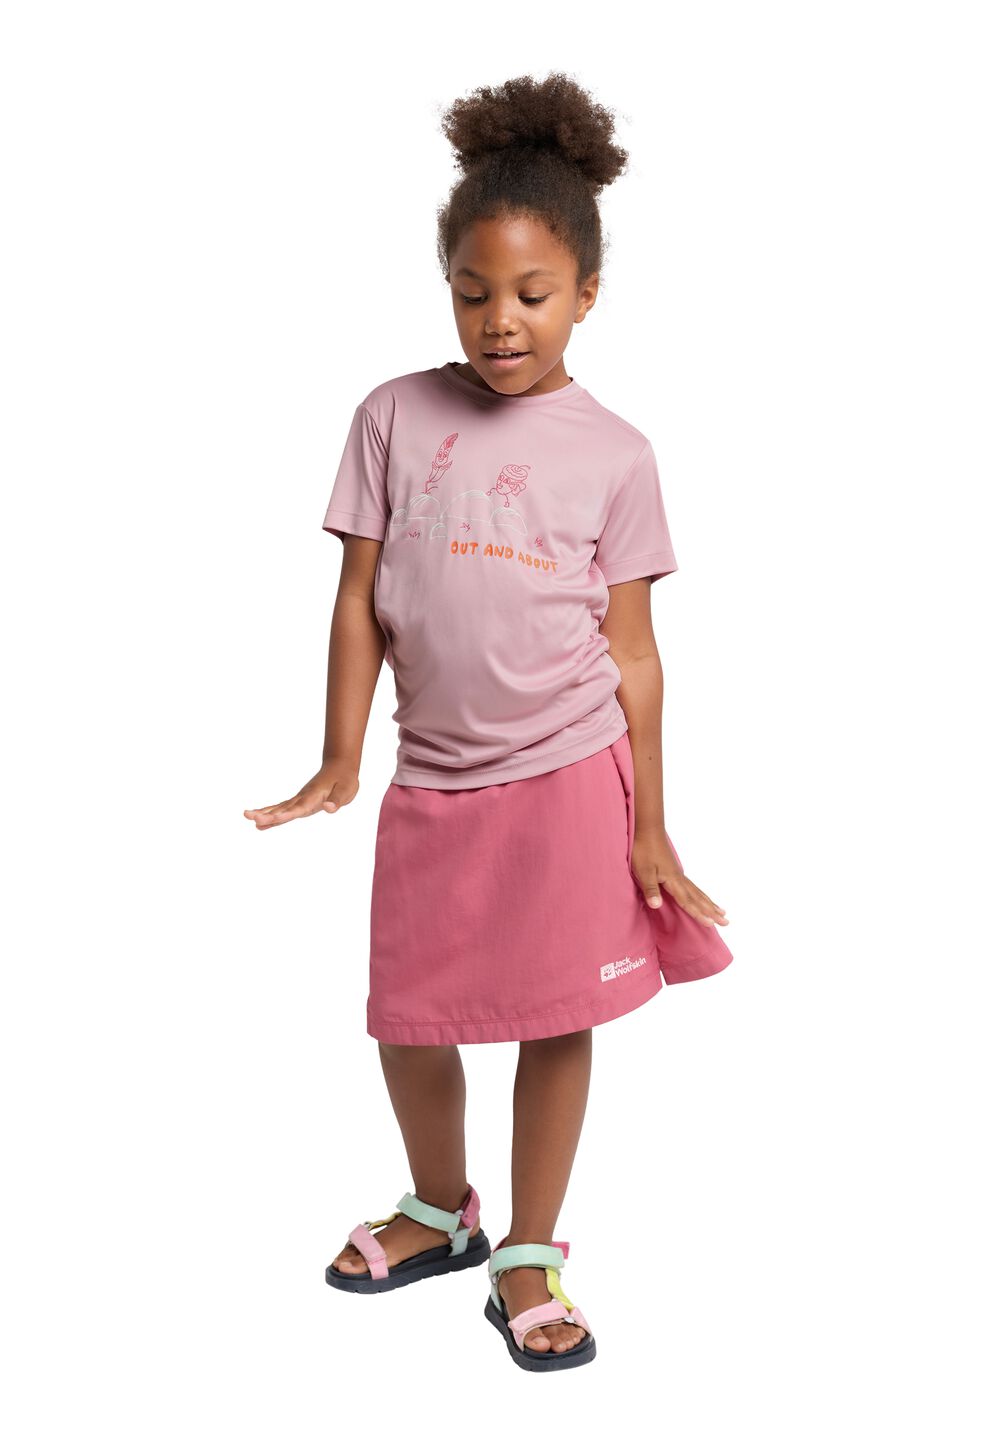 Jack Wolfskin OUT AND About T-Shirt Kids Functioneel shirt Kinderen 152 water lily water lily